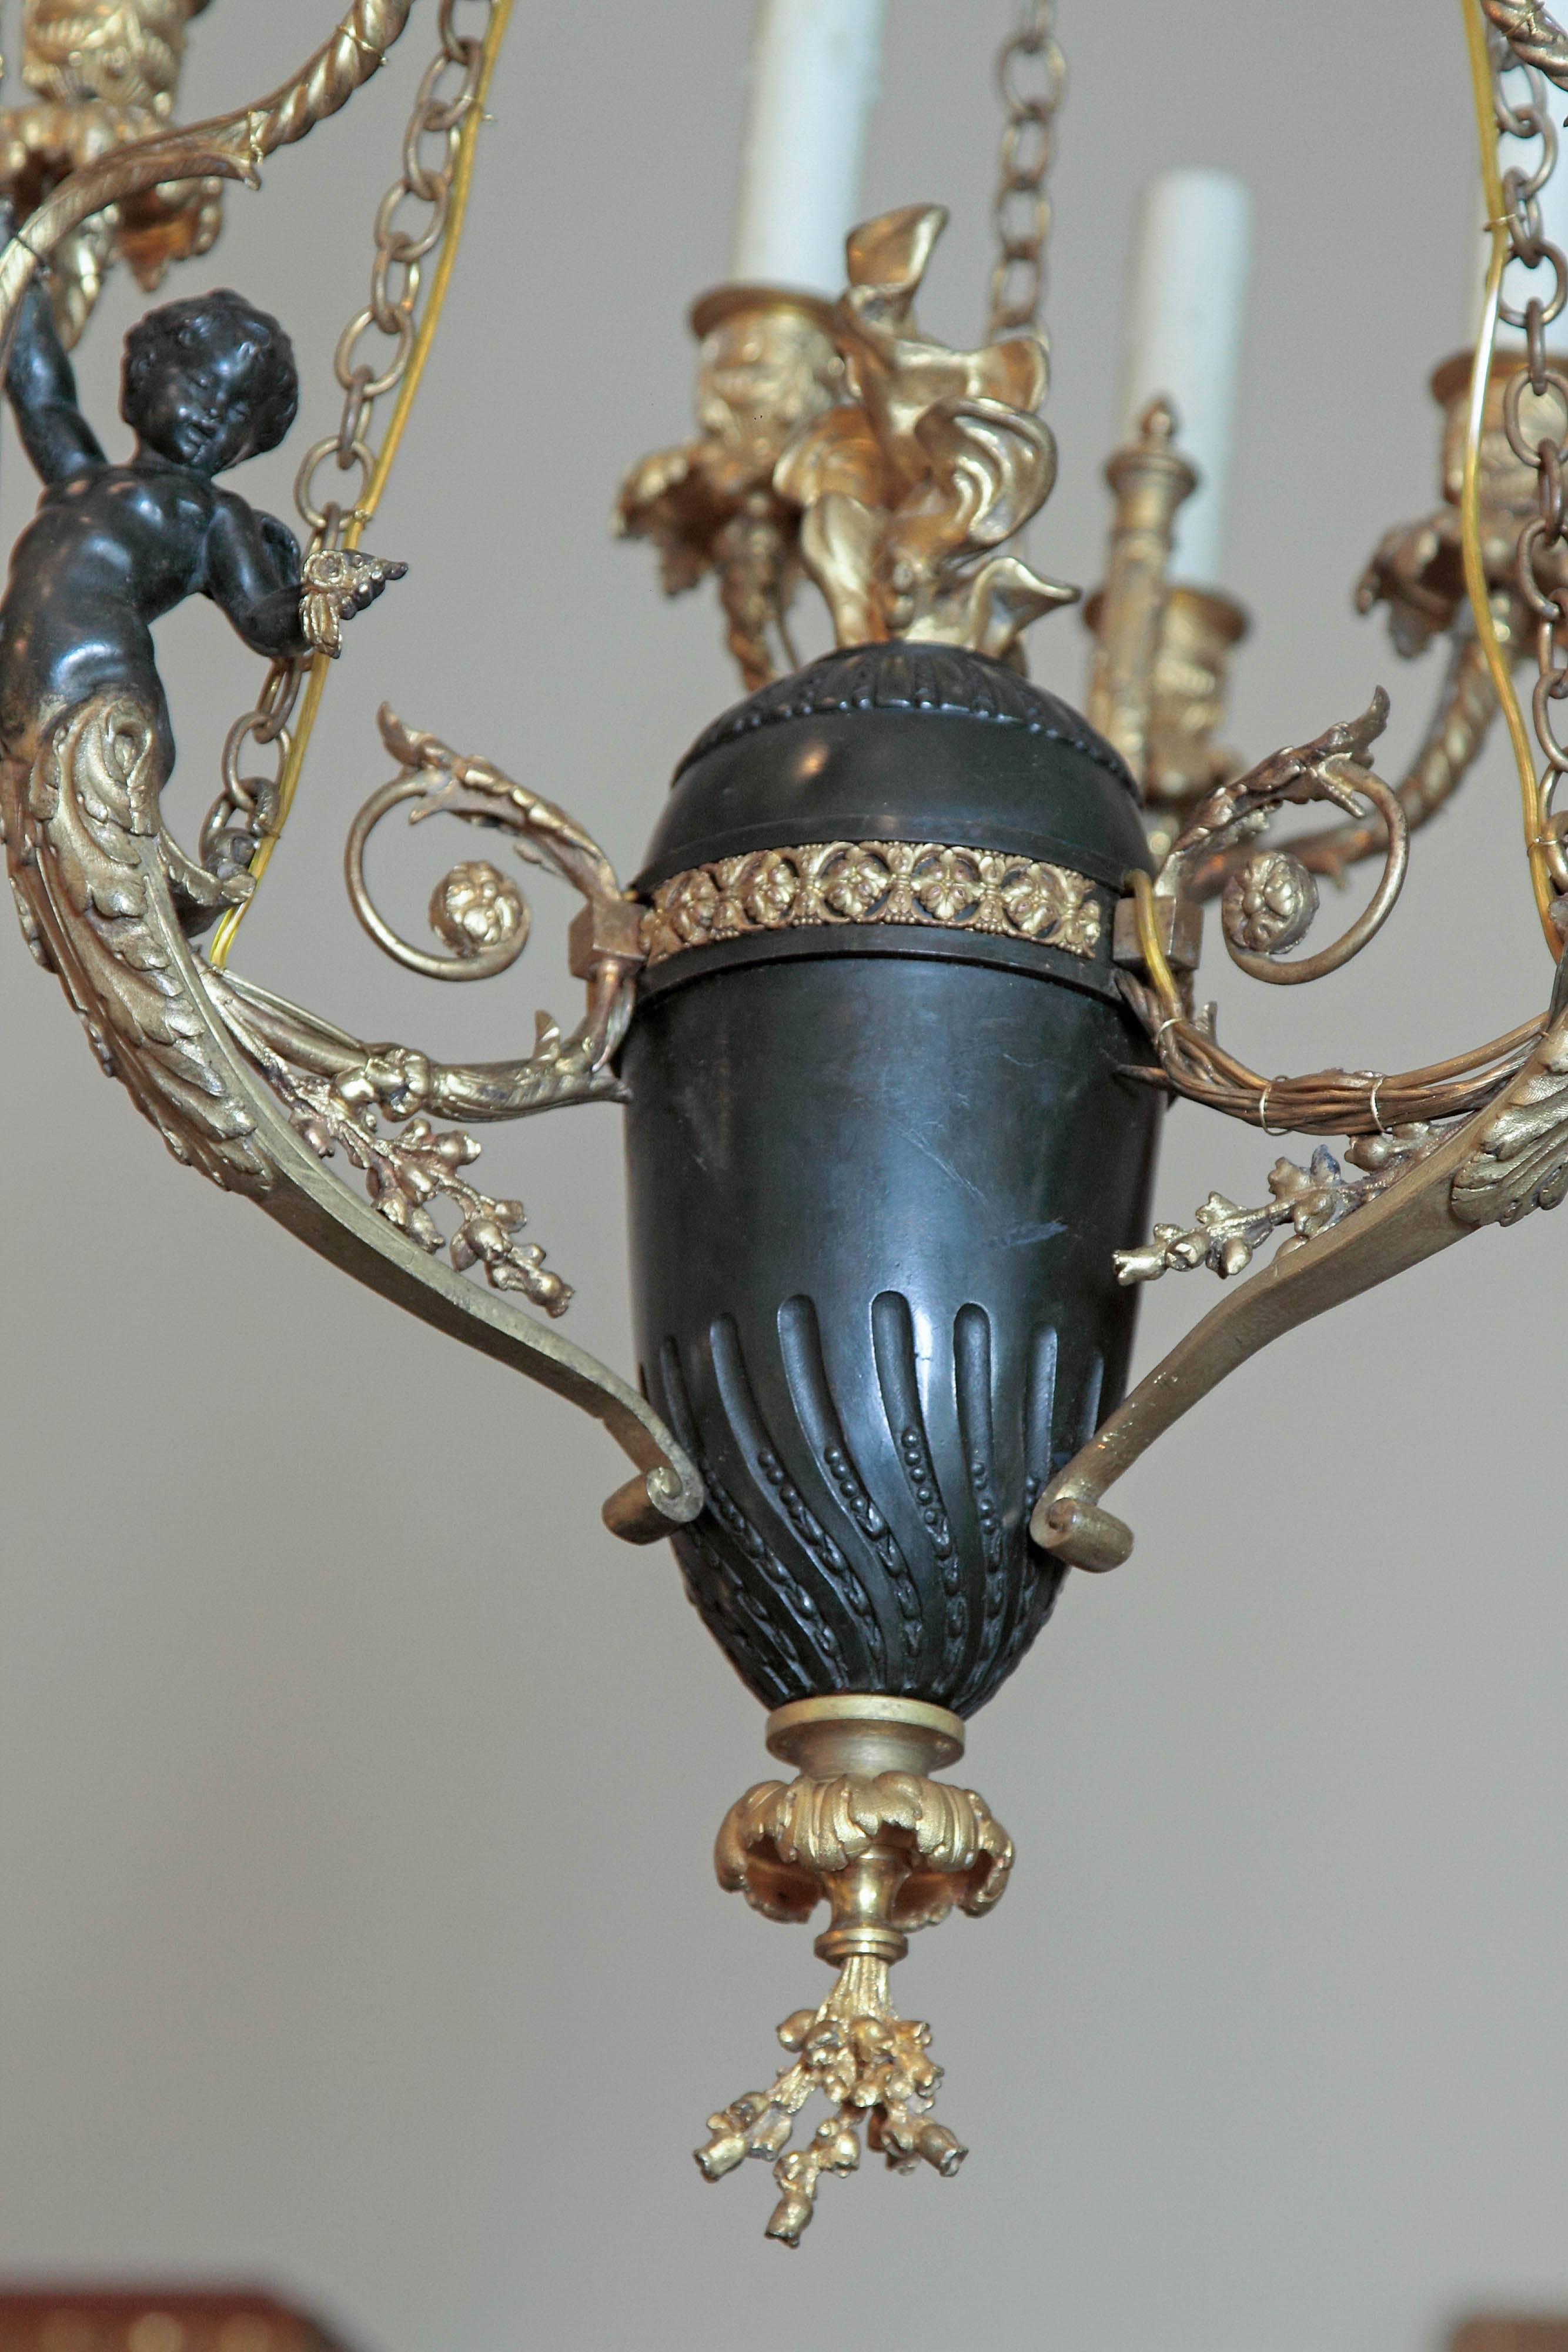 19th century French gilt bronze and patinated bronze powder room chandelier. Putti holding up light branches. Fine quality.